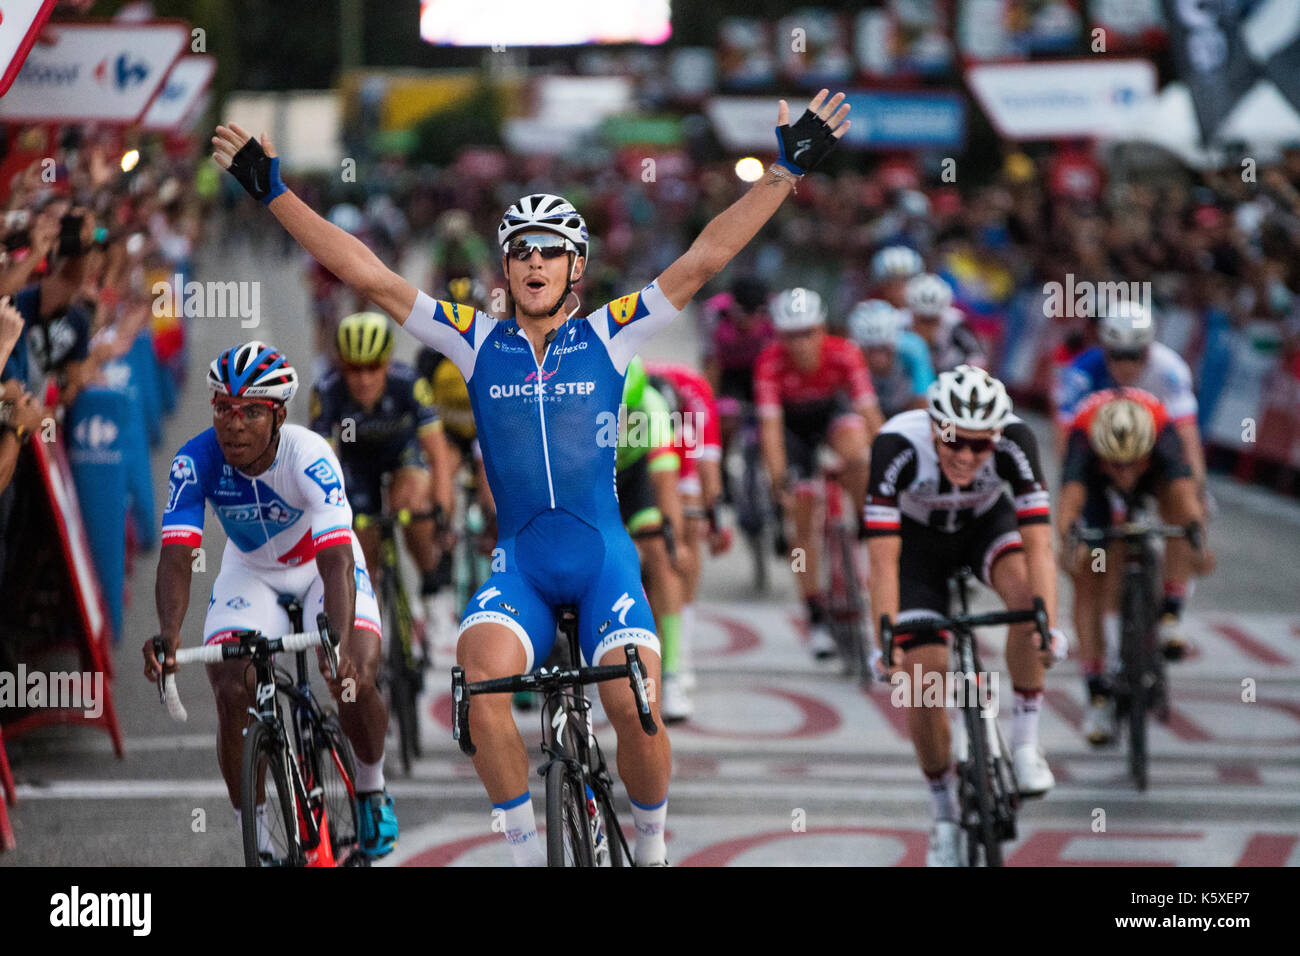 Madrid, Spain. 10th September, 2017. Winner celebrates his victory rides  during the stage 21 of Tour of Spain (Vuelta a España) between Madrid and Madrid on September 10, 2017 in Madrid, Spain. ©David Gato/Alamy Live News Stock Photo